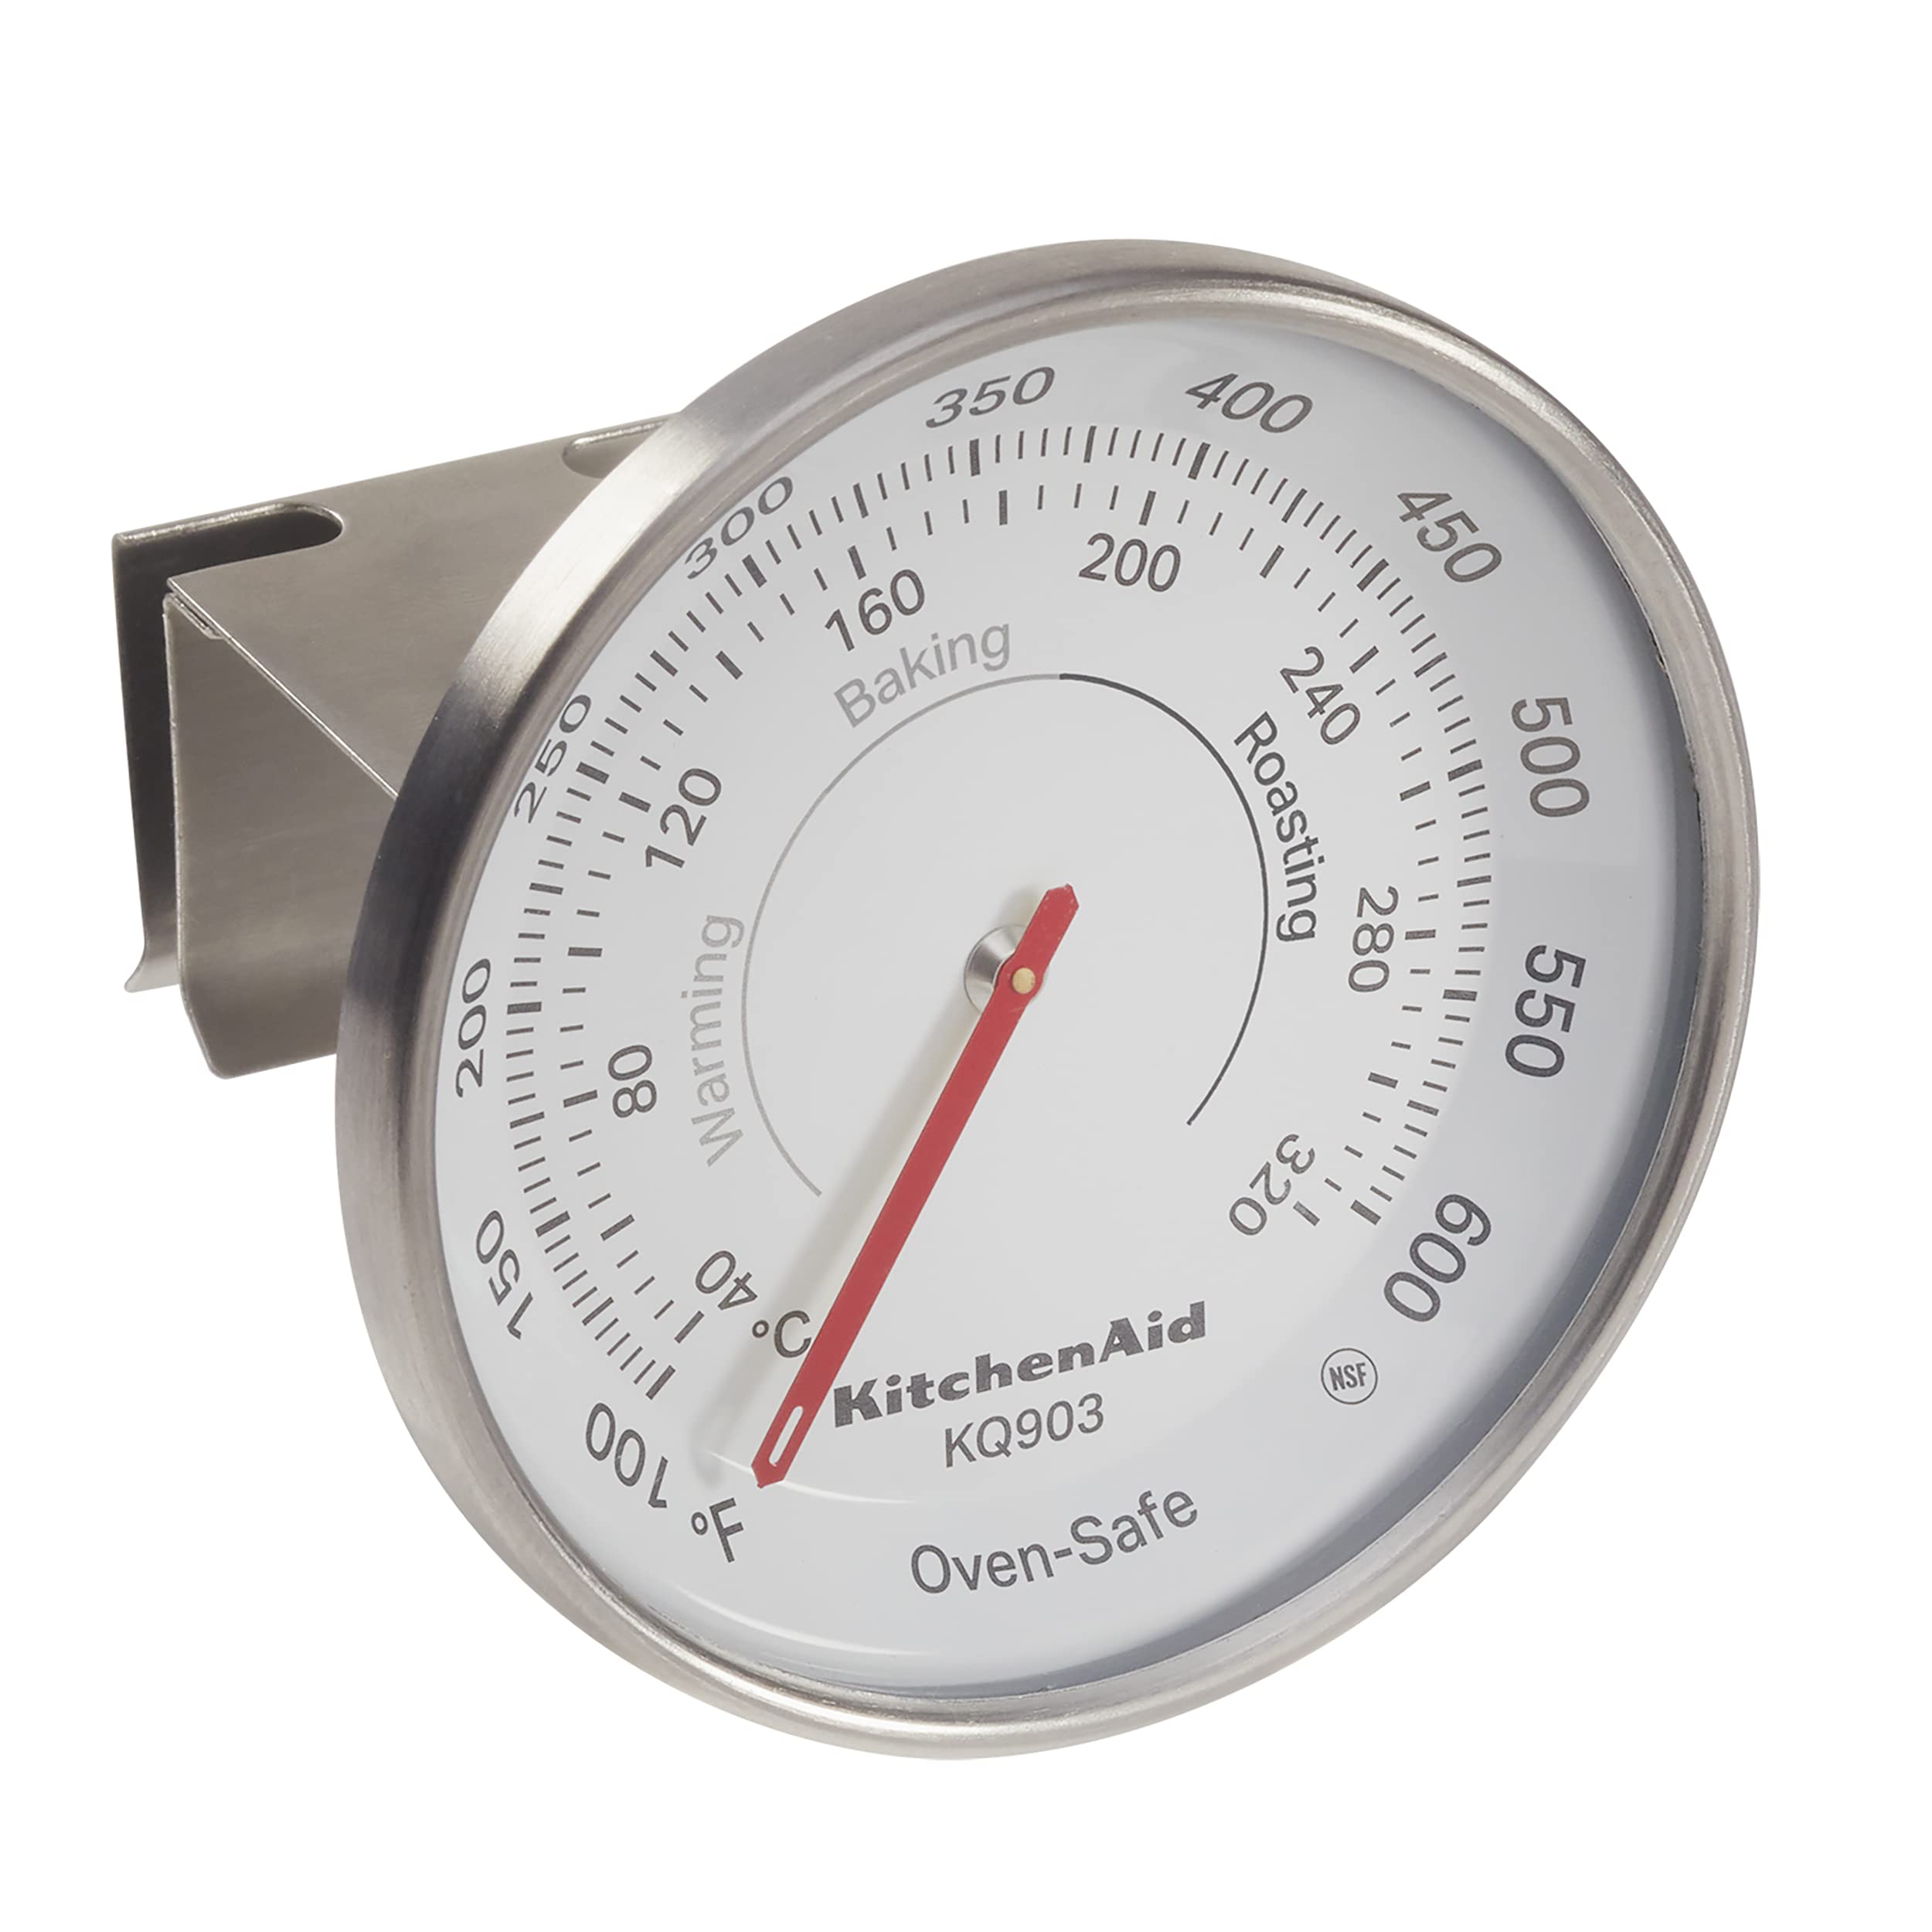 KitchenAid KQ903 3-in Analog Dial Oven/Appliance Thermometer, TEMPERATURE RANGE: 100F to 600F, Stainless Steel